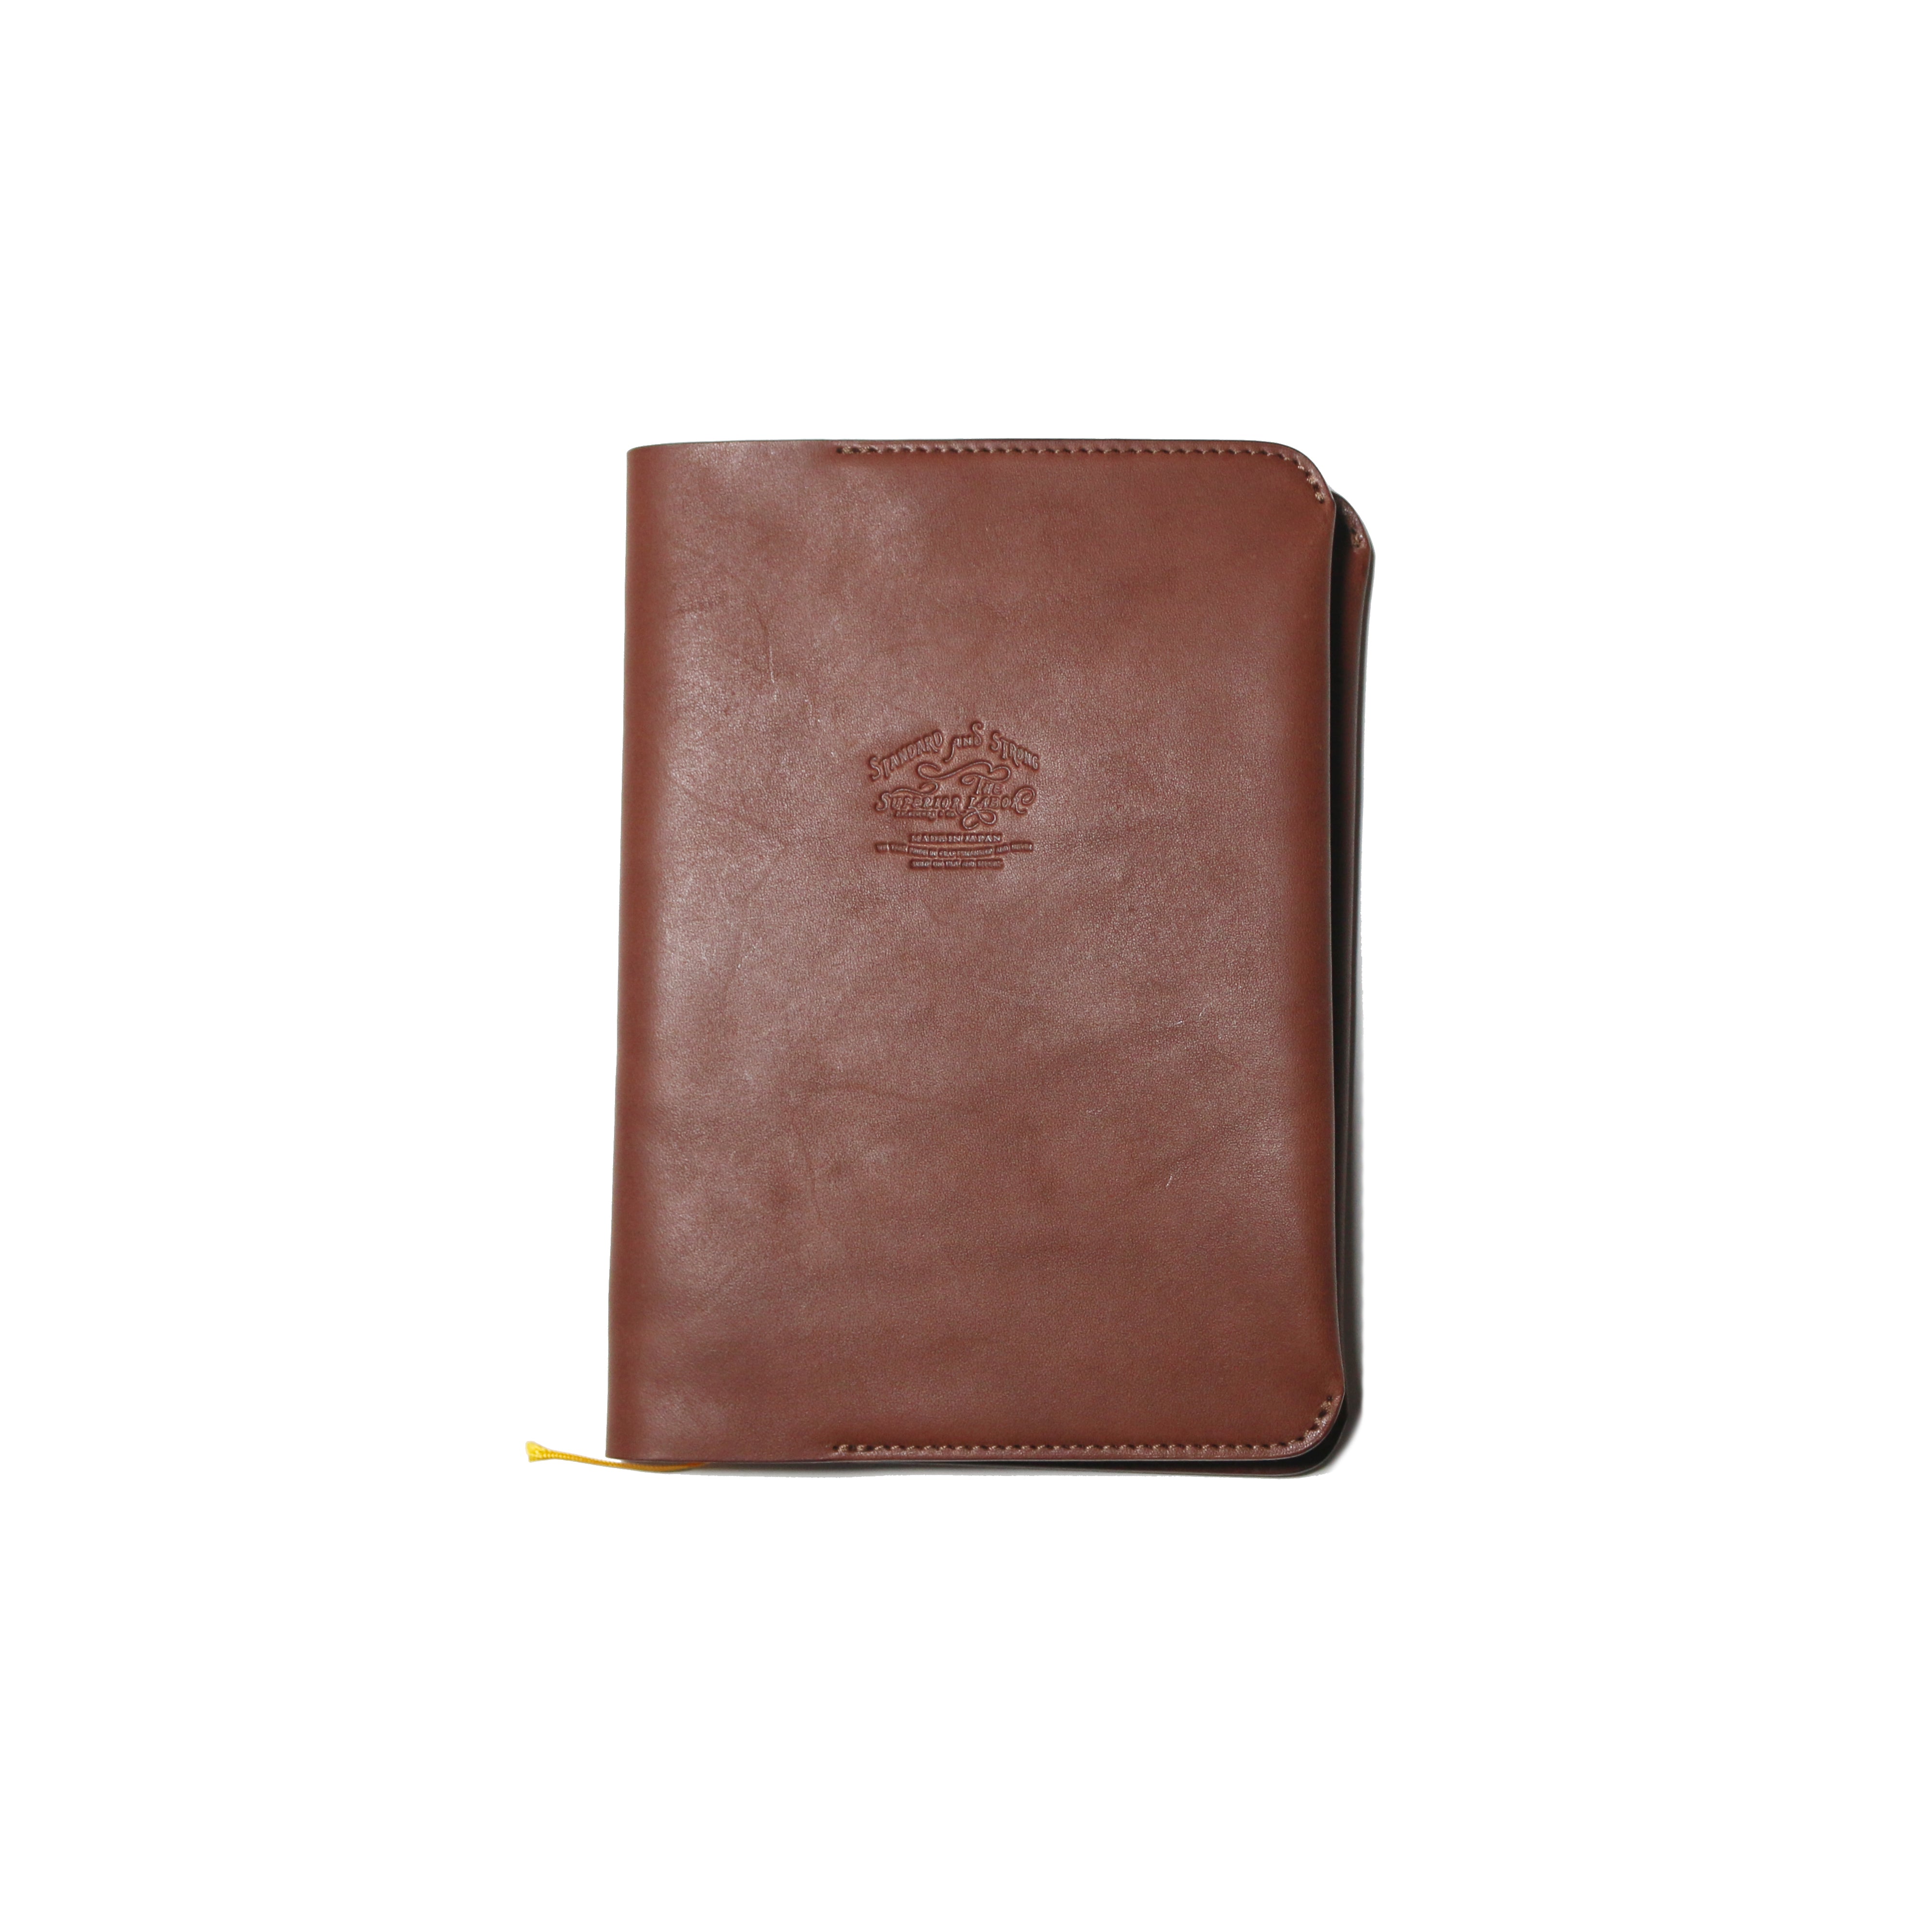 BG0025 A5size notebook cover